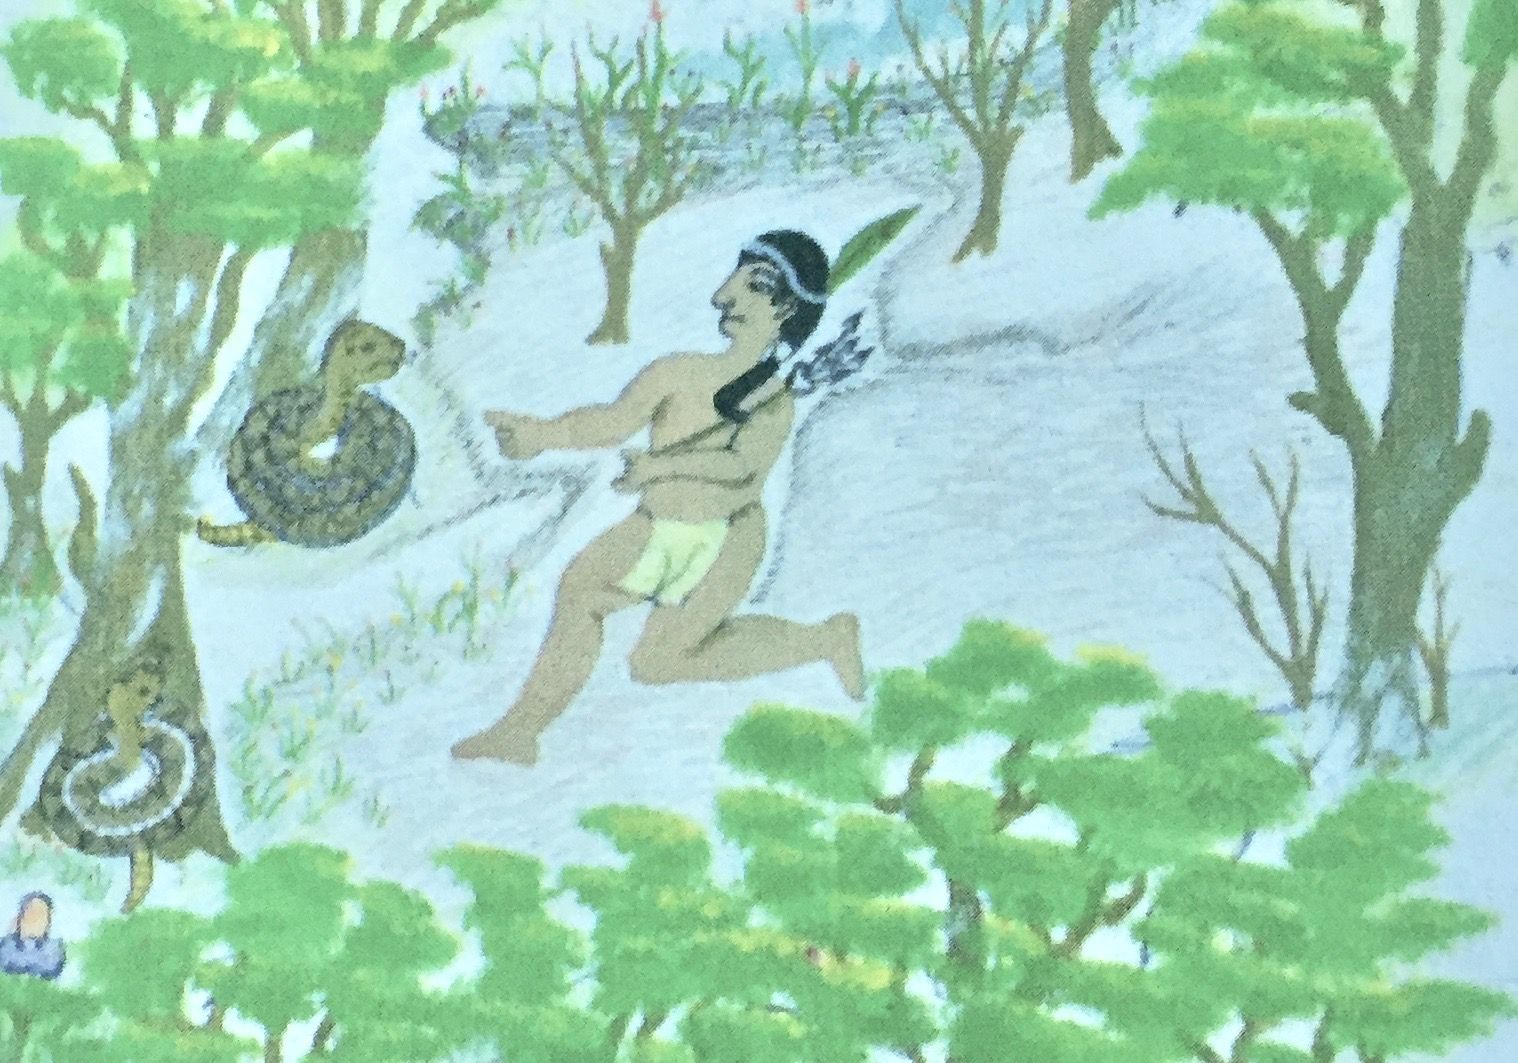 Stories passed down through generations share morals, history, and cultural norms. A commonly shared tale of a man and snake is depicted in this drawing by Ngäbe-Buglé community members. Image by Samira Tella. Costa Rica, 2018.